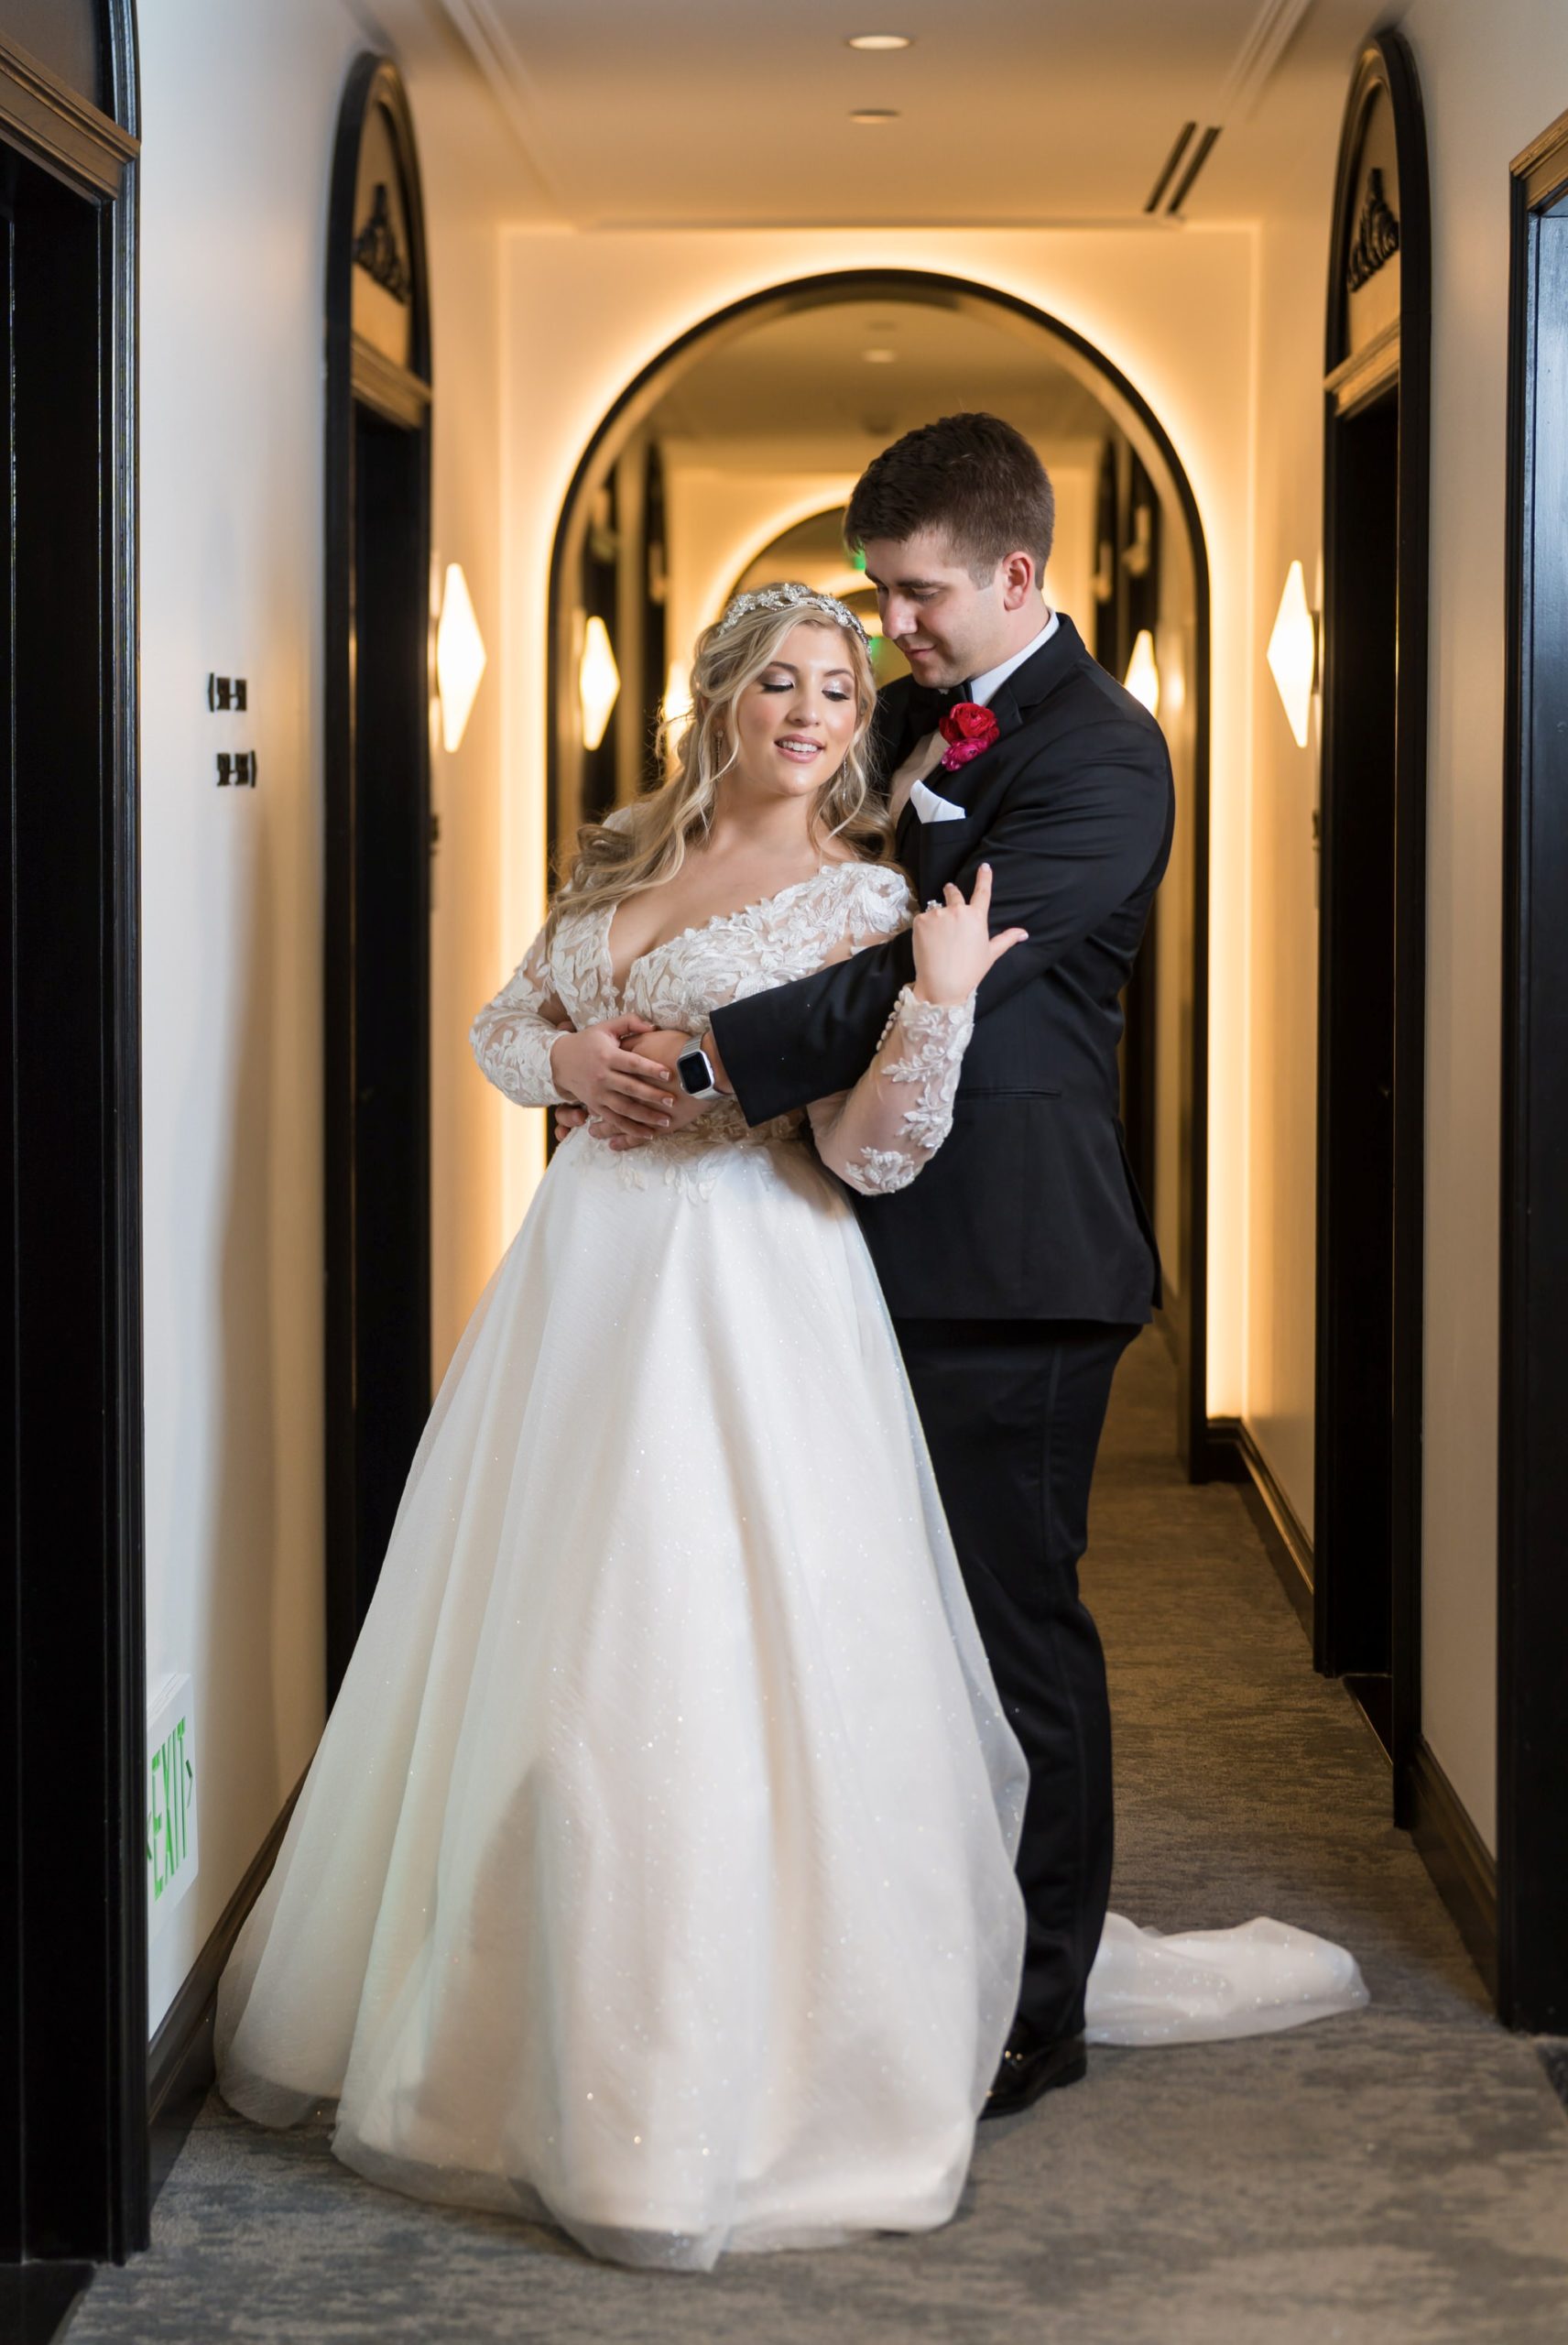 A bride and groom pose in the arched hallway of their Daxton Hotel wedding.  